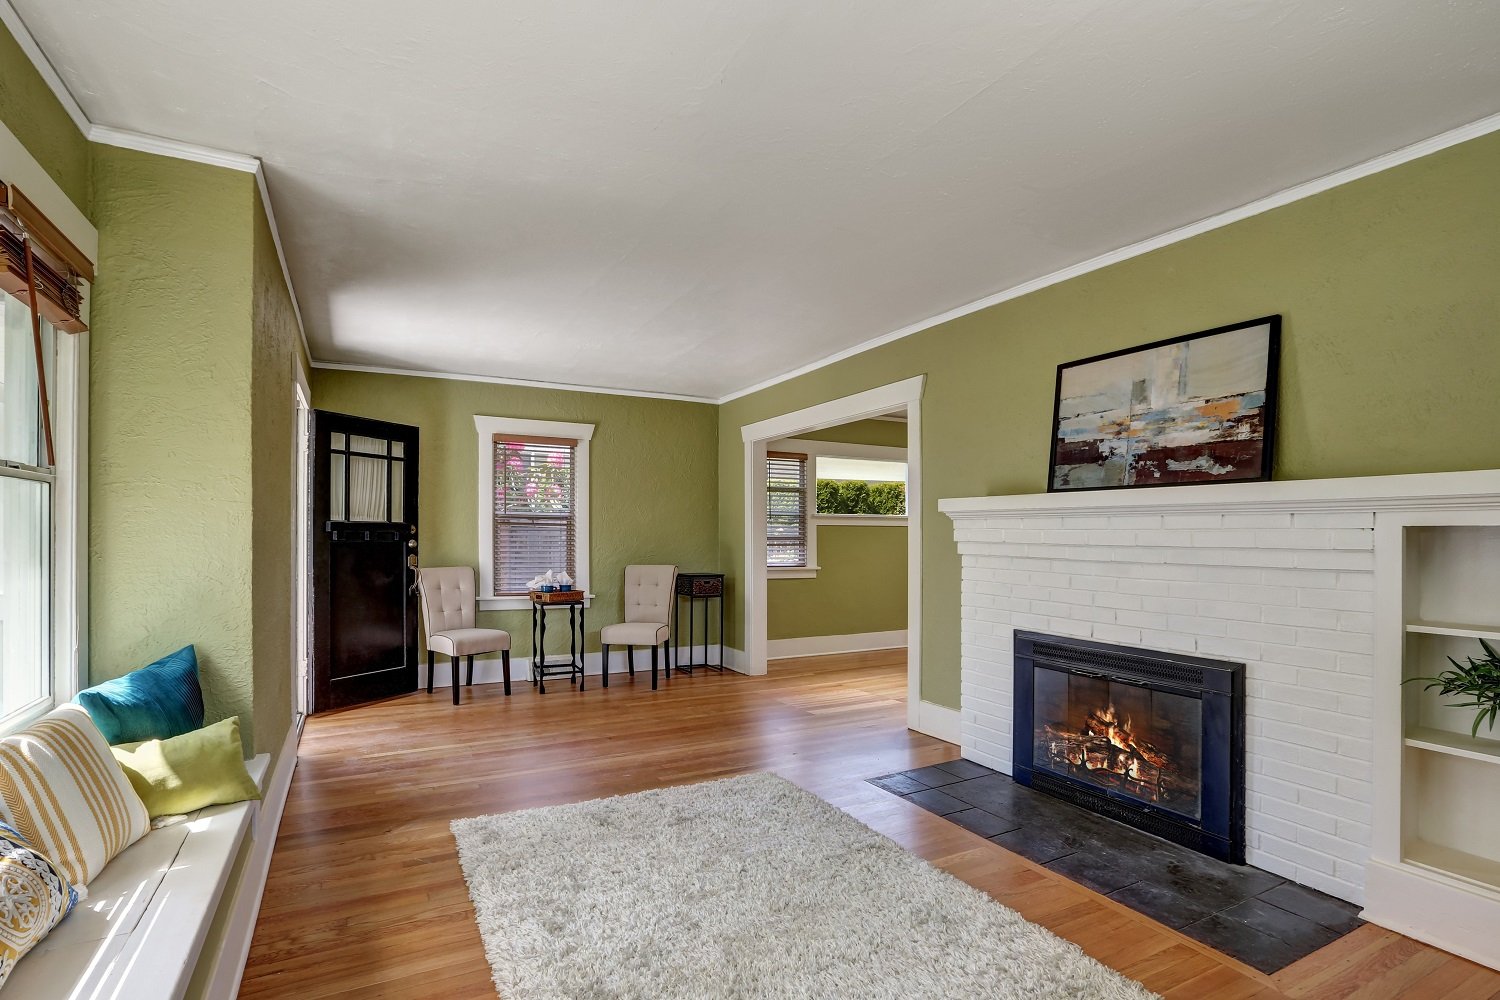 Smooth out your fireplace surrounds